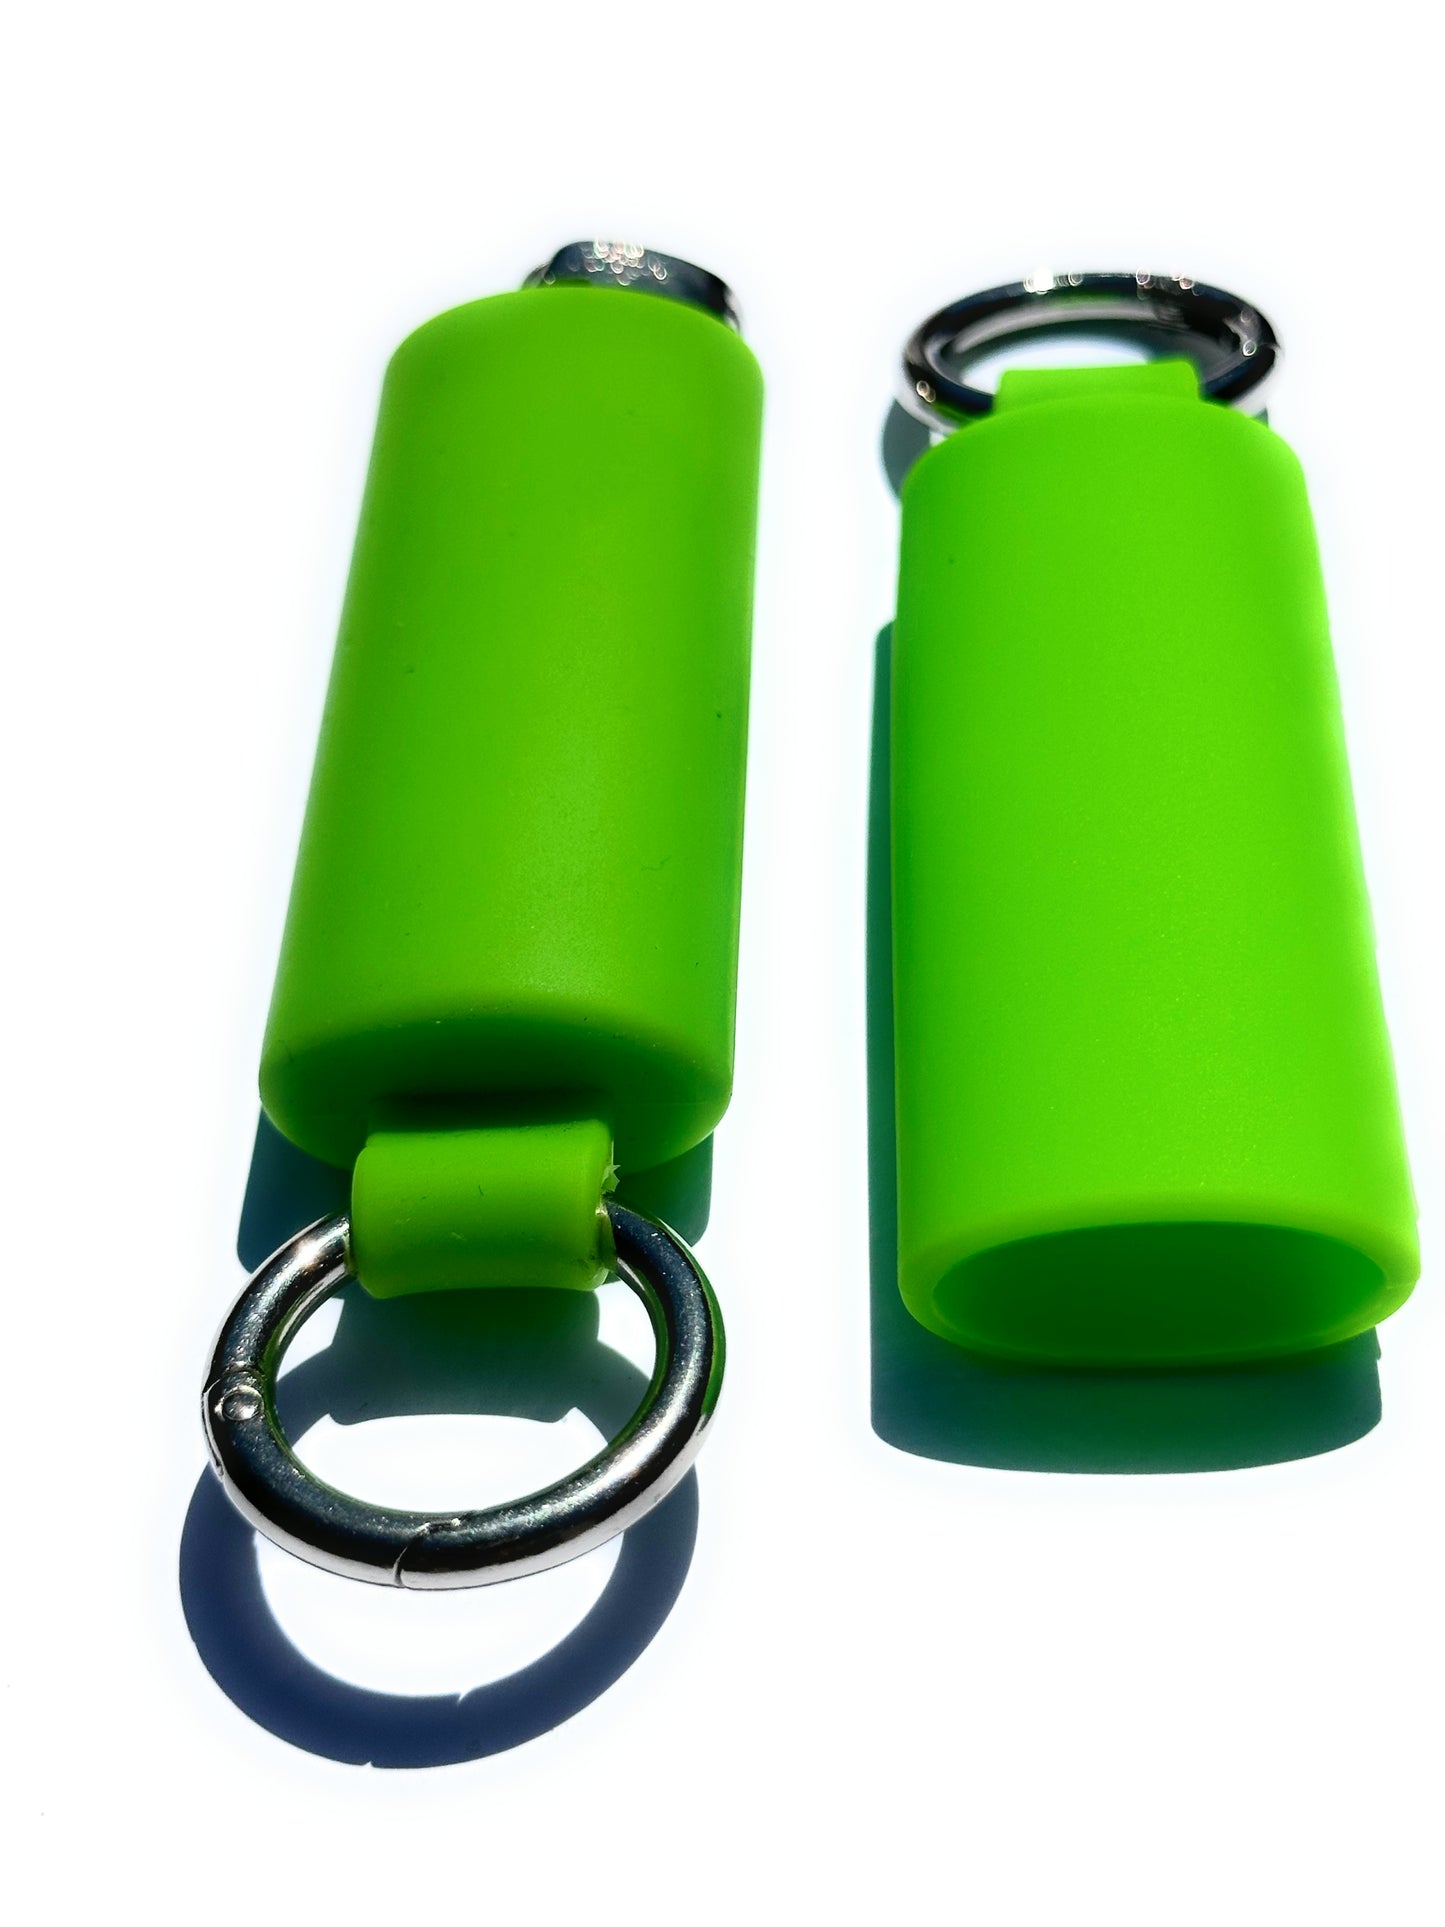 Neon Green Lighter Holder Keychain with Spring Clip made by Lighter Locators